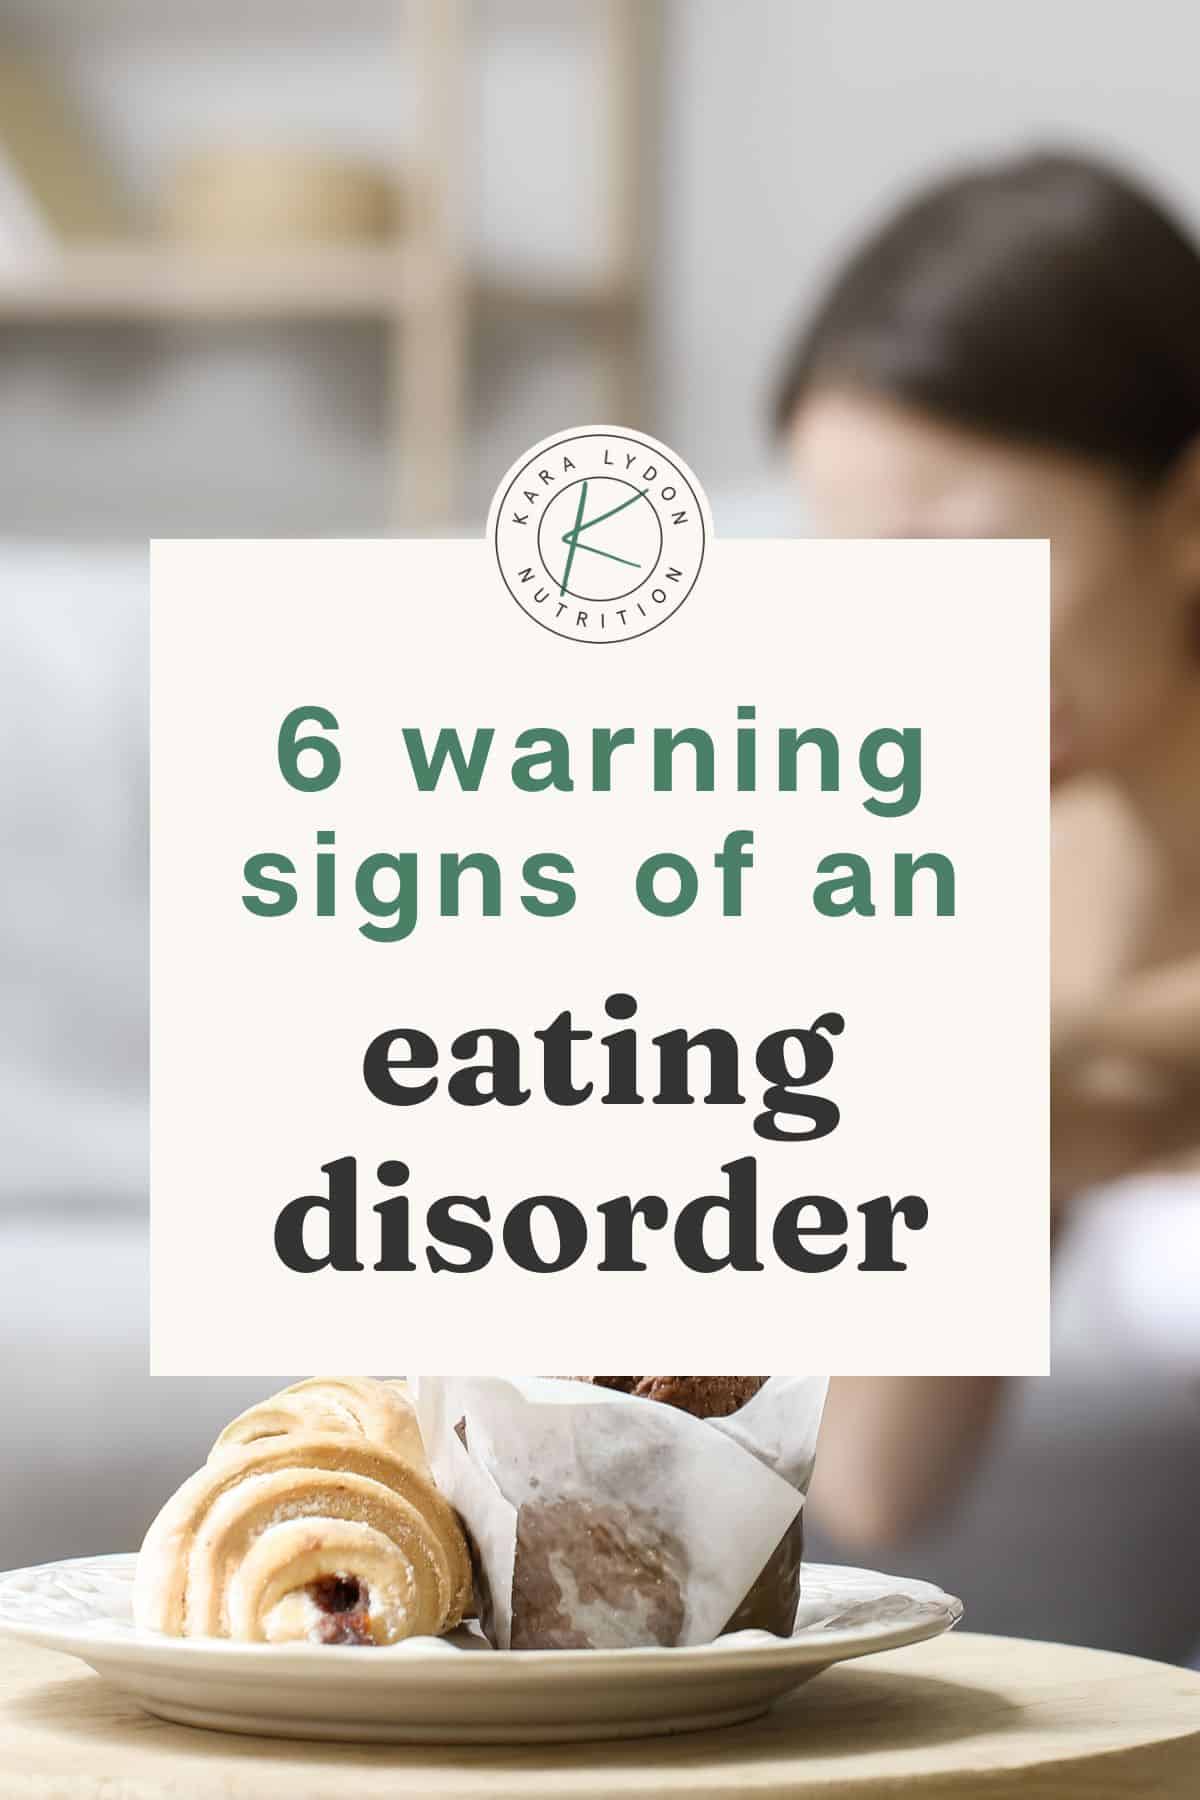 image of white plate with two pastries with text overlay, "6 warning signs of an eating disorder."